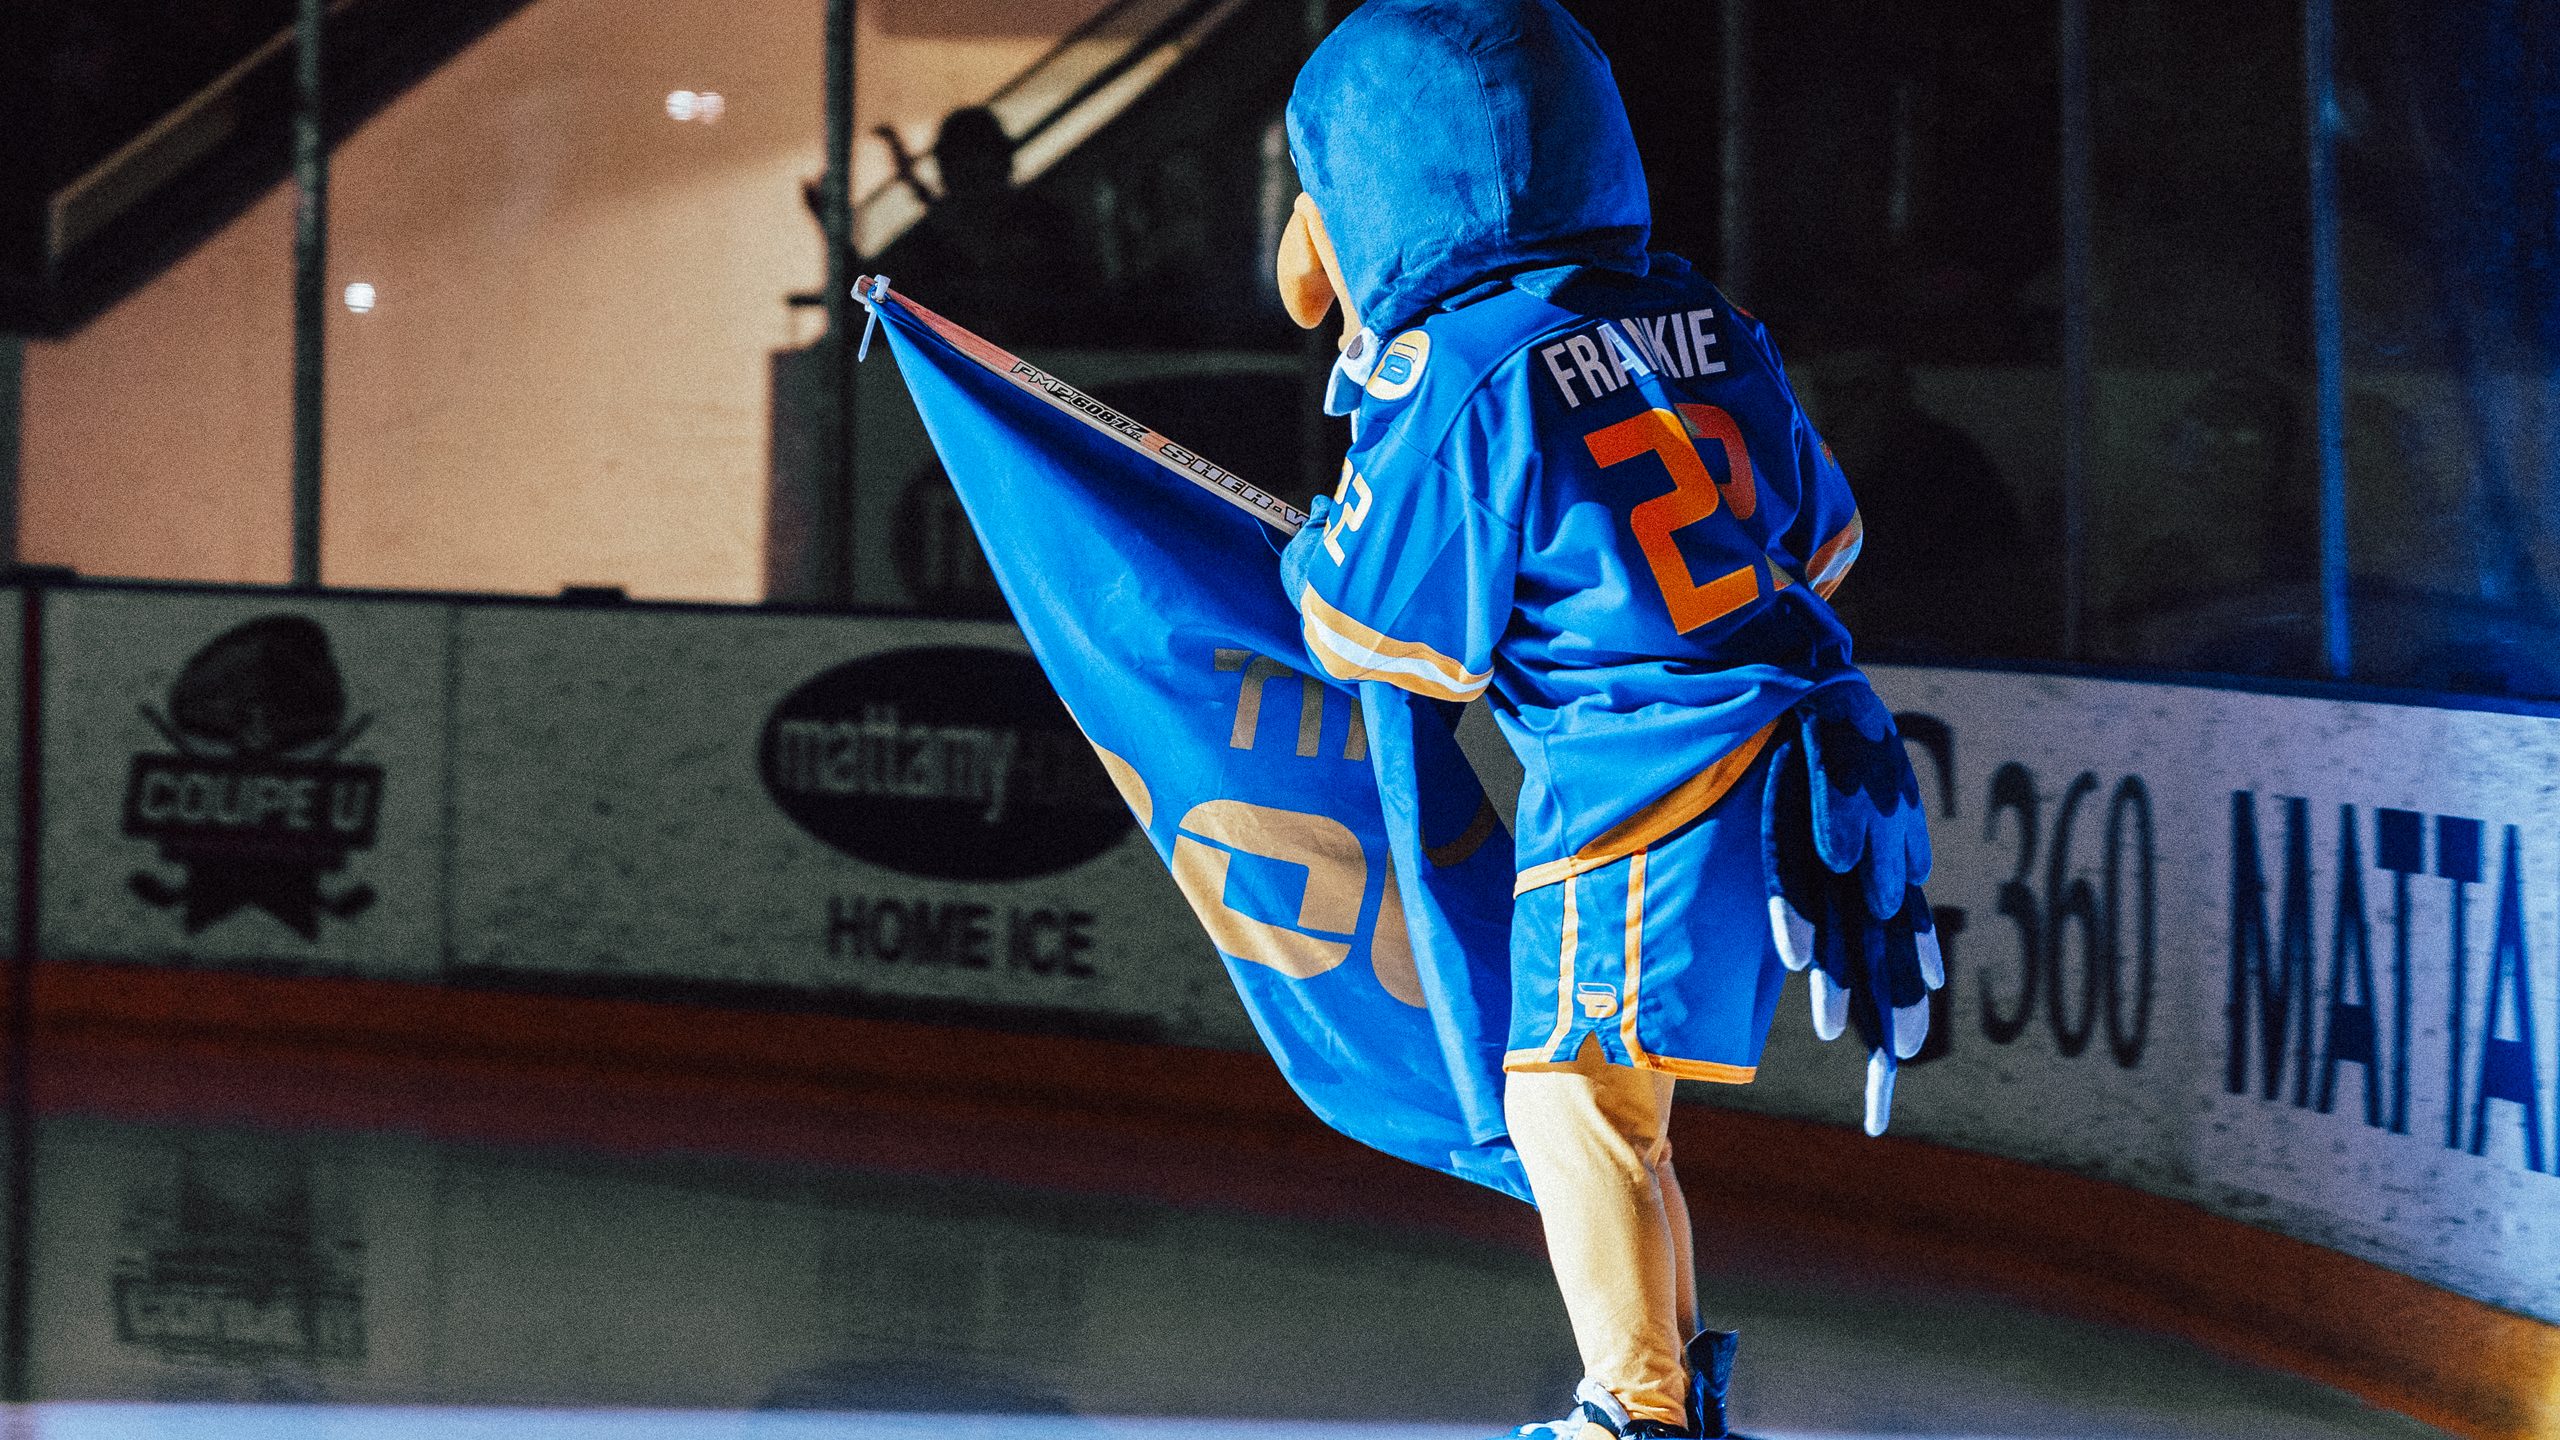 New TMU Bold mascot Frankie the Falcon holds a flag while skating on the rink